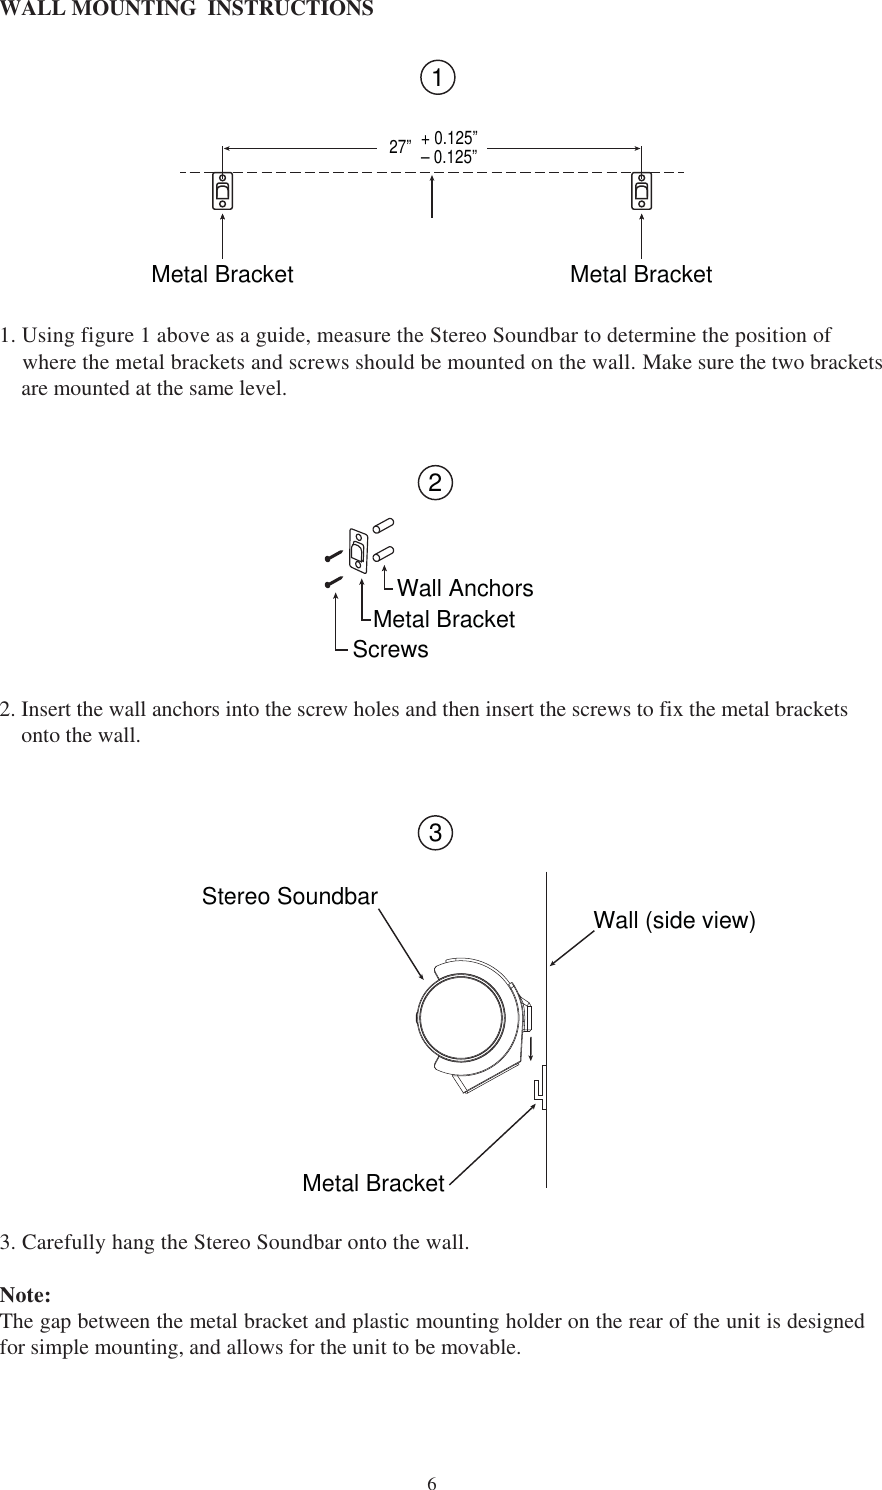  6WALL MOUNTING  INSTRUCTIONS 1. Using figure 1 above as a guide, measure the Stereo Soundbar to determine the position of     where the metal brackets and screws should be mounted on the wall. Make sure the two brackets    are mounted at the same level. Metal Bracket Metal Bracket27” + 0.125”– 0.125”12Wall AnchorsMetal BracketScrews2. Insert the wall anchors into the screw holes and then insert the screws to fix the metal brackets    onto the wall.   3. Carefully hang the Stereo Soundbar onto the wall. Note:The gap between the metal bracket and plastic mounting holder on the rear of the unit is designedfor simple mounting, and allows for the unit to be movable.  3Stereo SoundbarMetal BracketWall (side view)